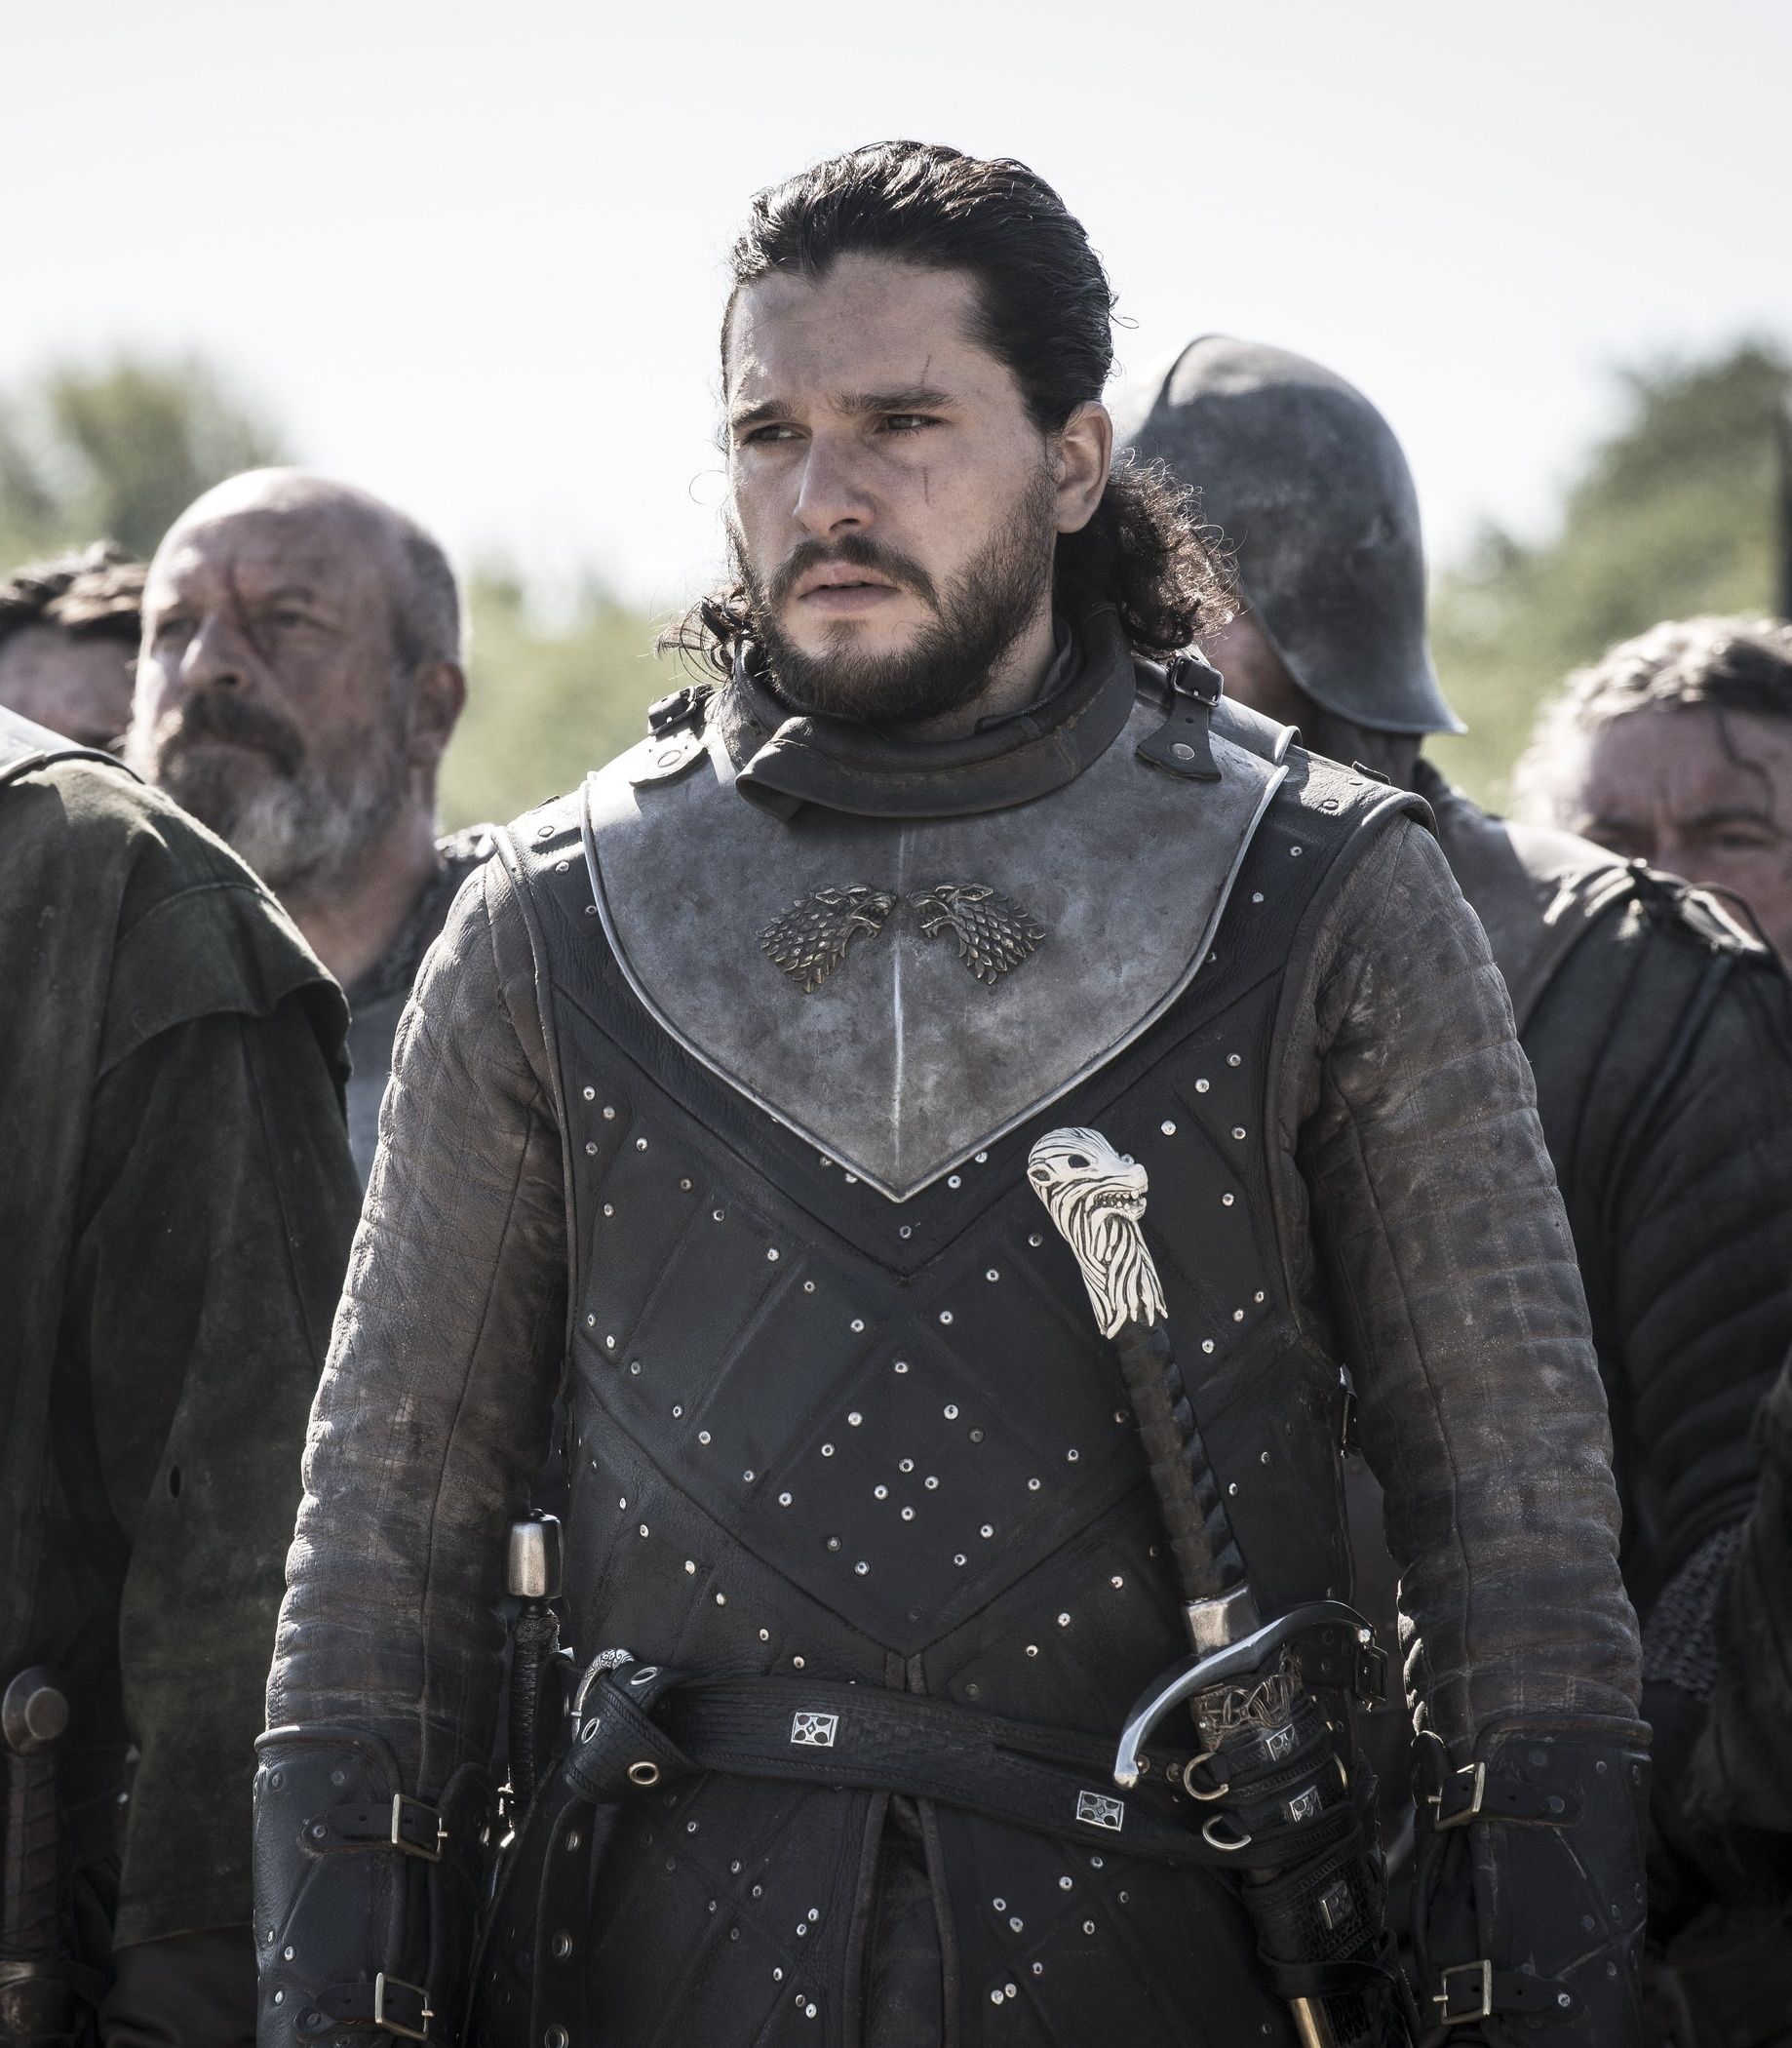 Kit Harrington as Jon Snow and Liam Cunningham as Davos Seaworth in Game of Thrones Vertical TLDR